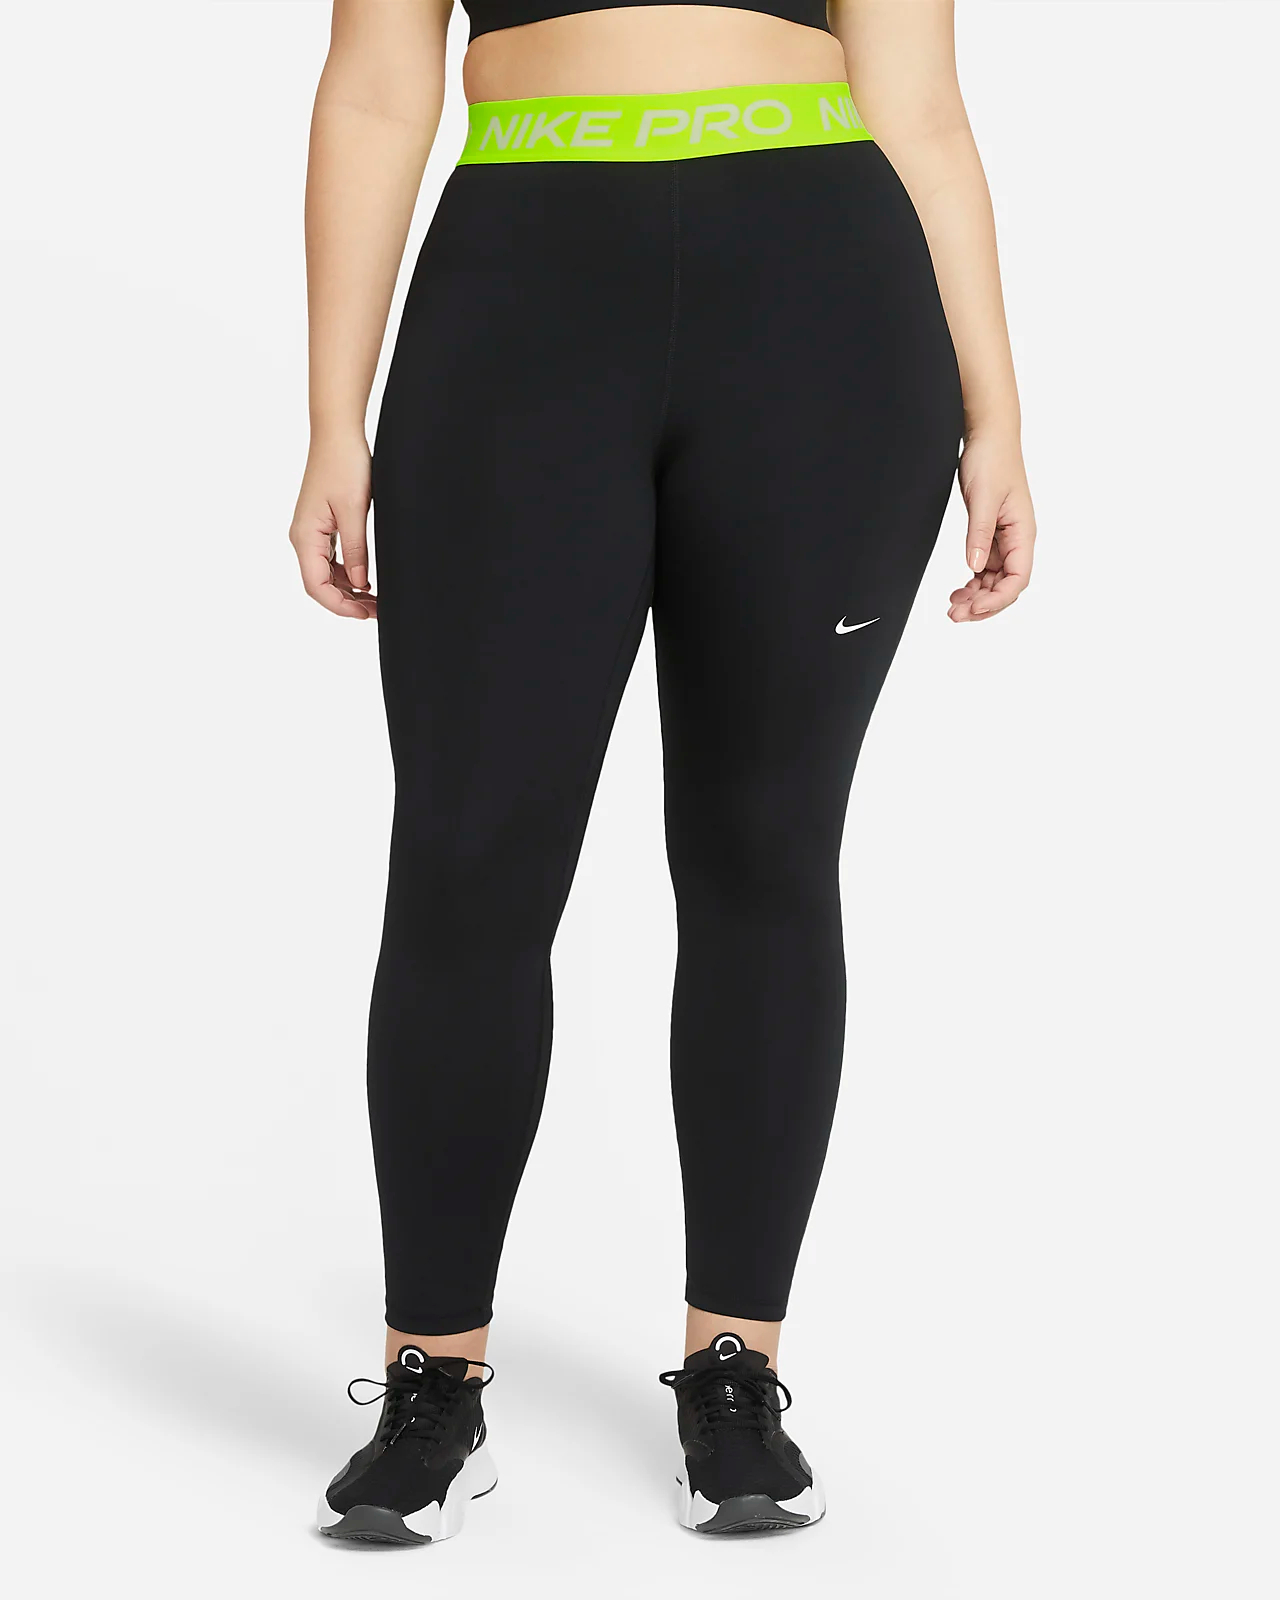 Women nike leggings, in the realm of athletic wear, few items are as ubiquitous and essential as leggings. The evolution of leggings has seen them